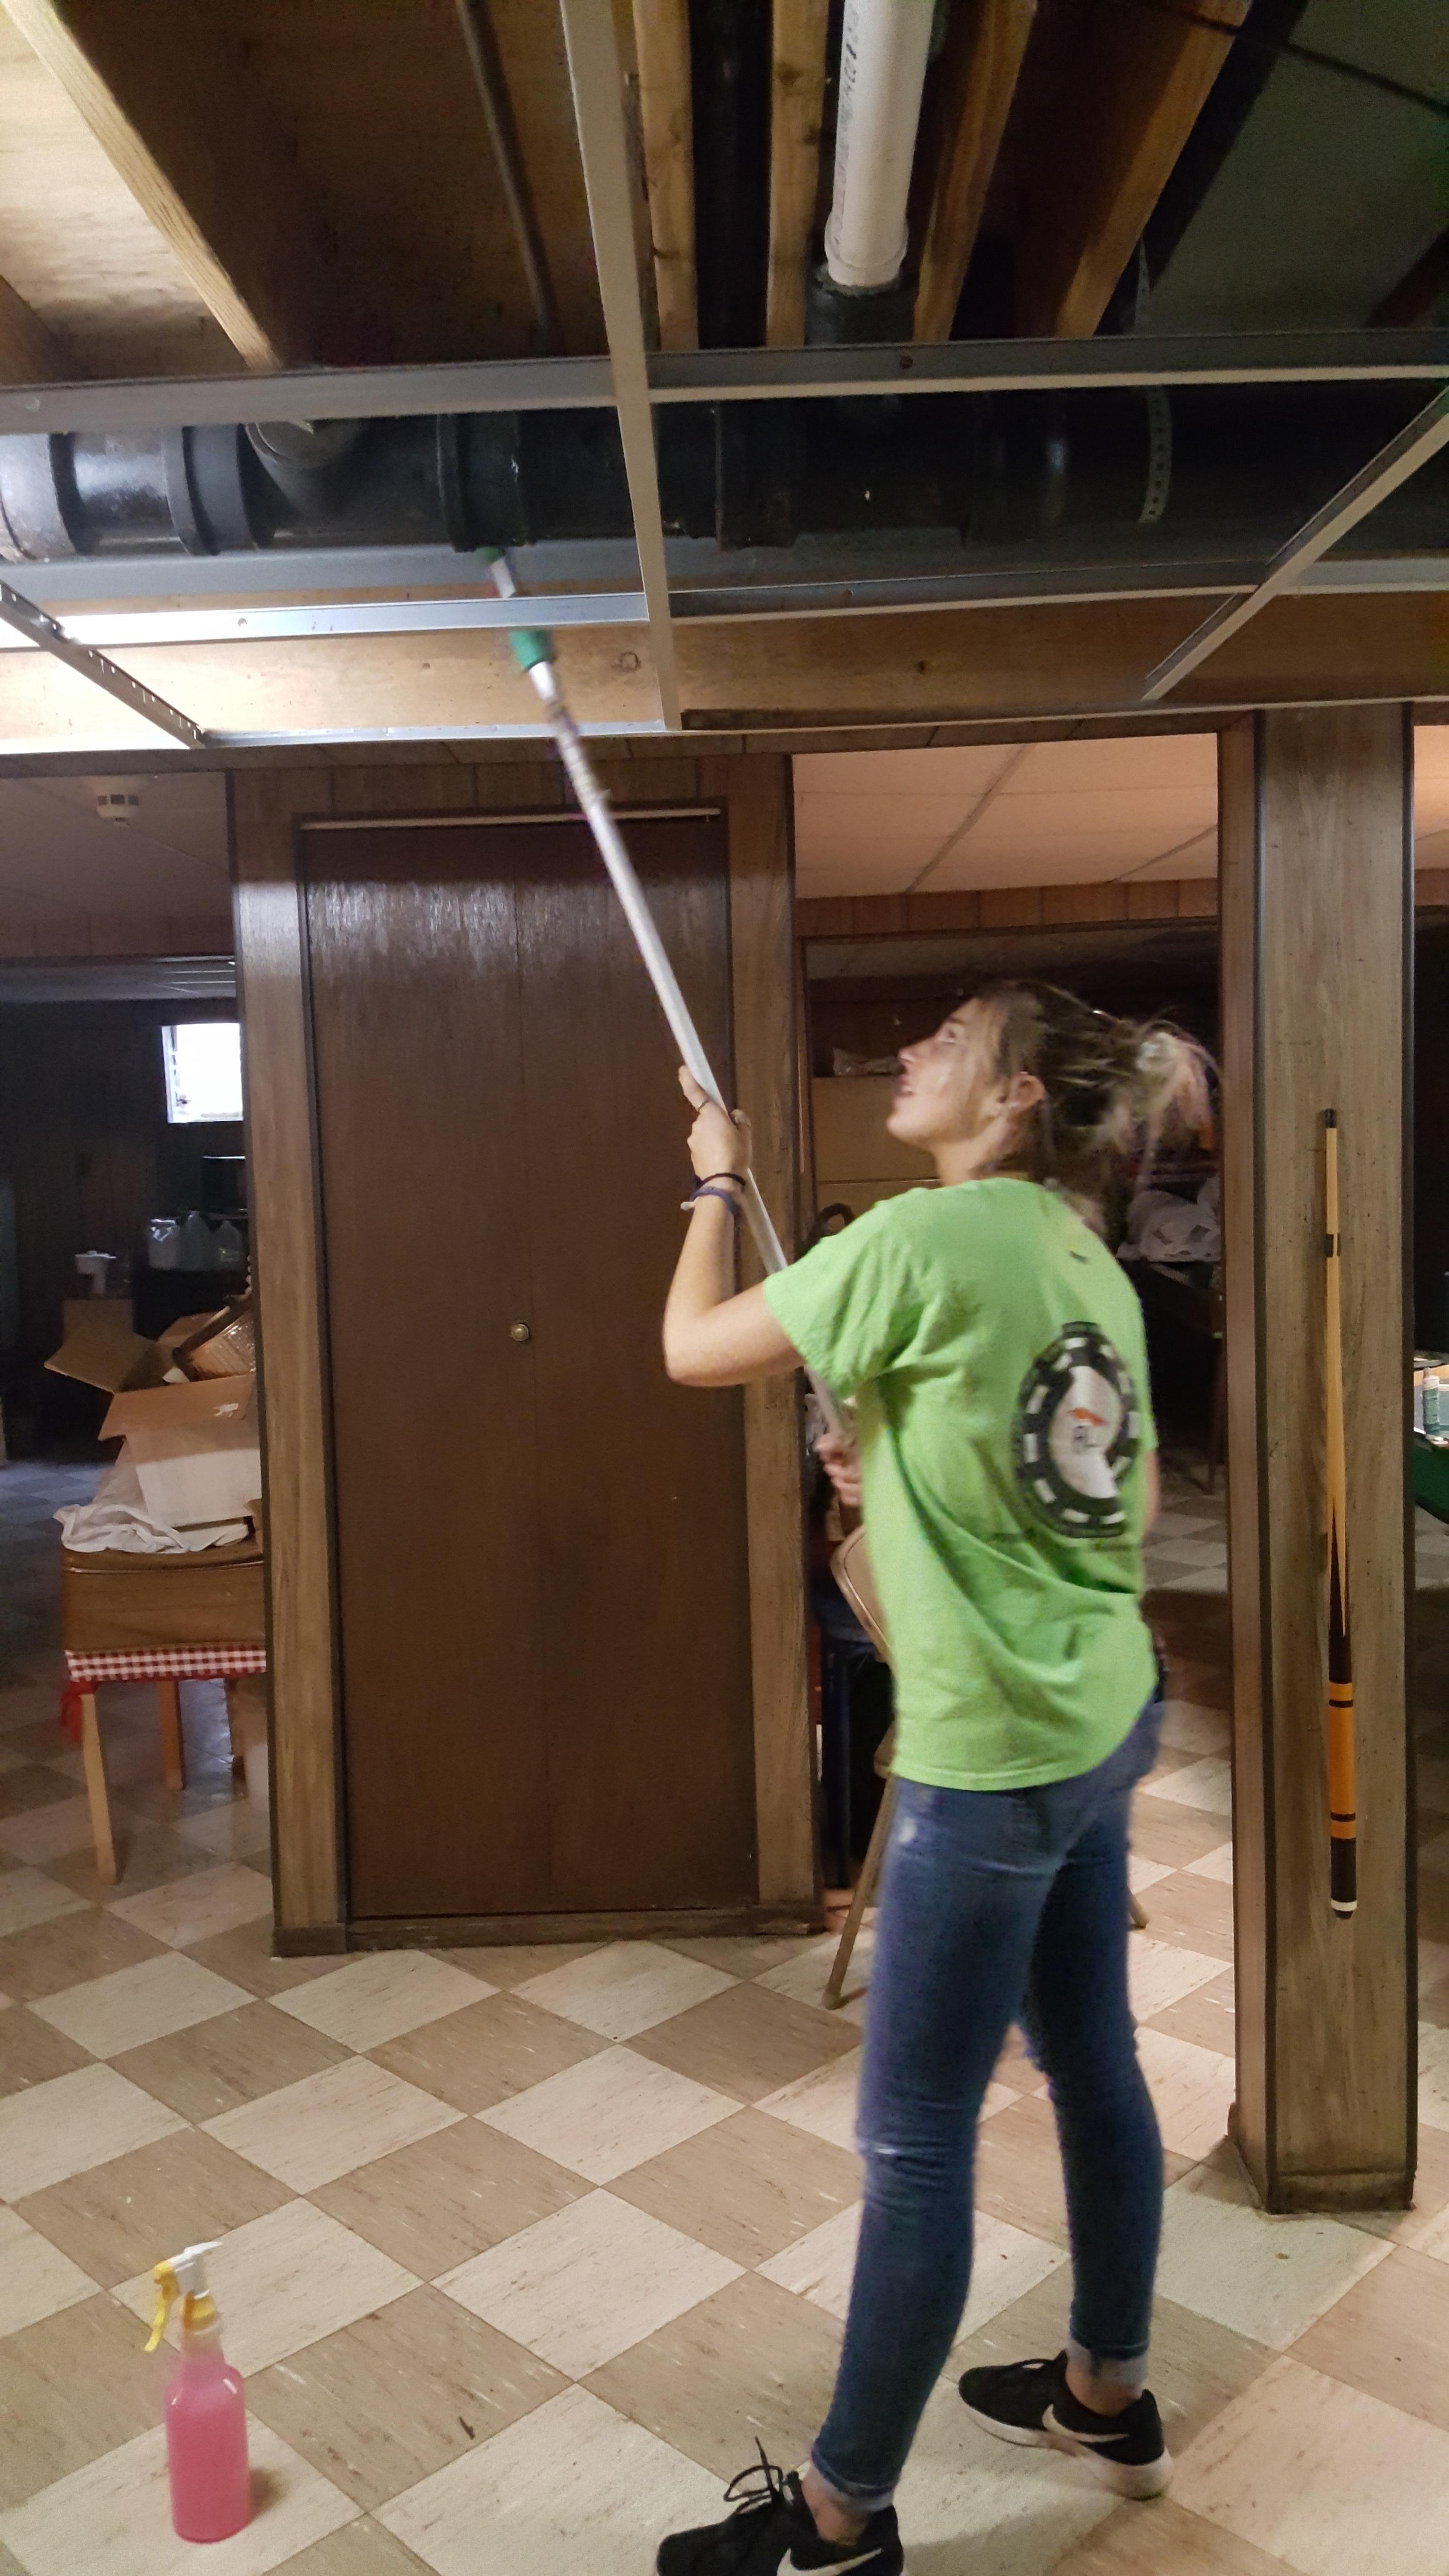 SERVPRO in action!